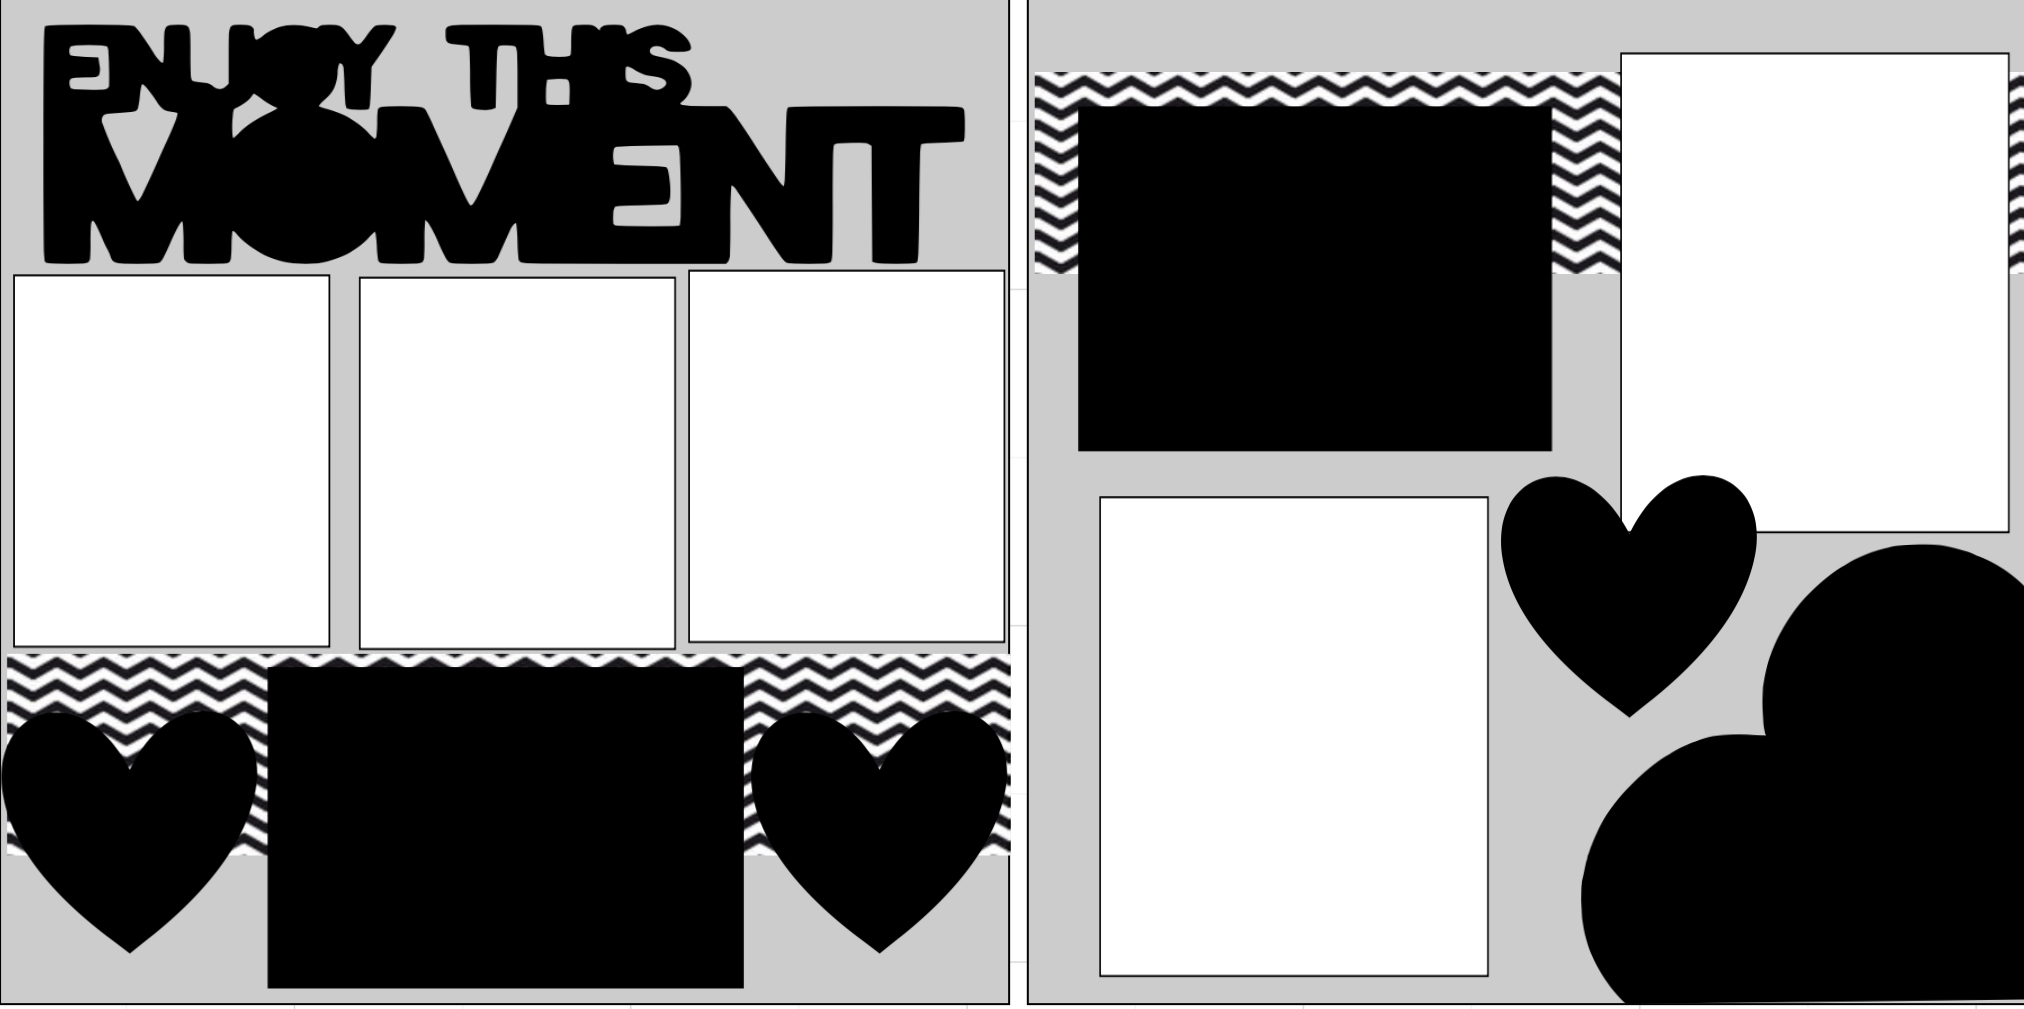 Enjoy this Moment page kit